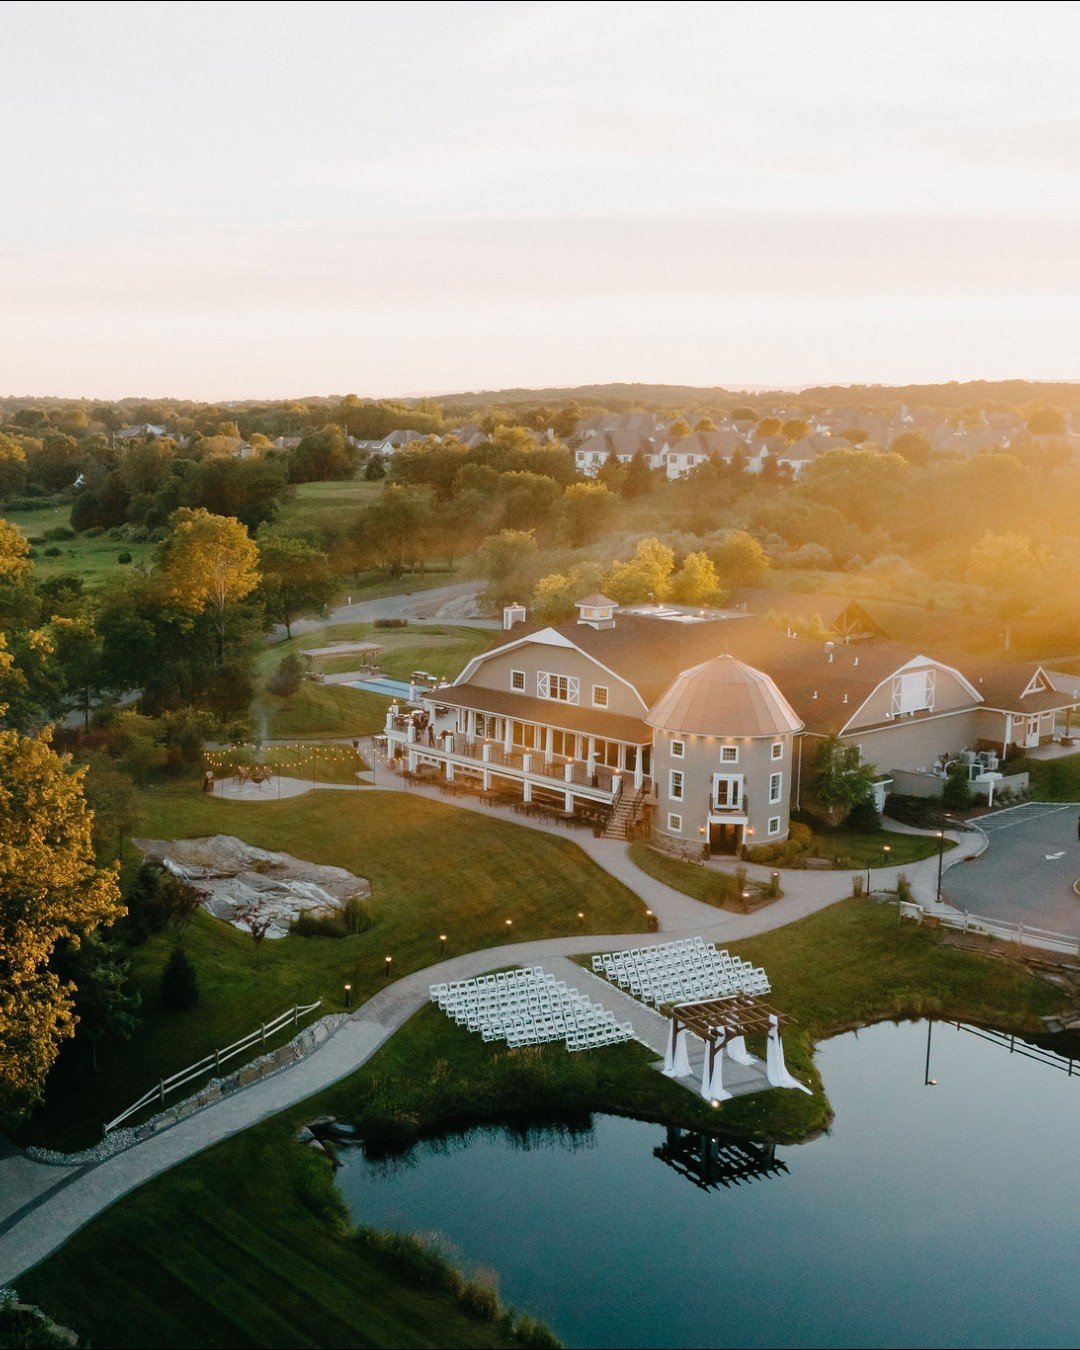 Home away from home ♡
From planning your wedding to the big day itself, this place will be home to some of your best memories ✨ 

📸 @jonpivko